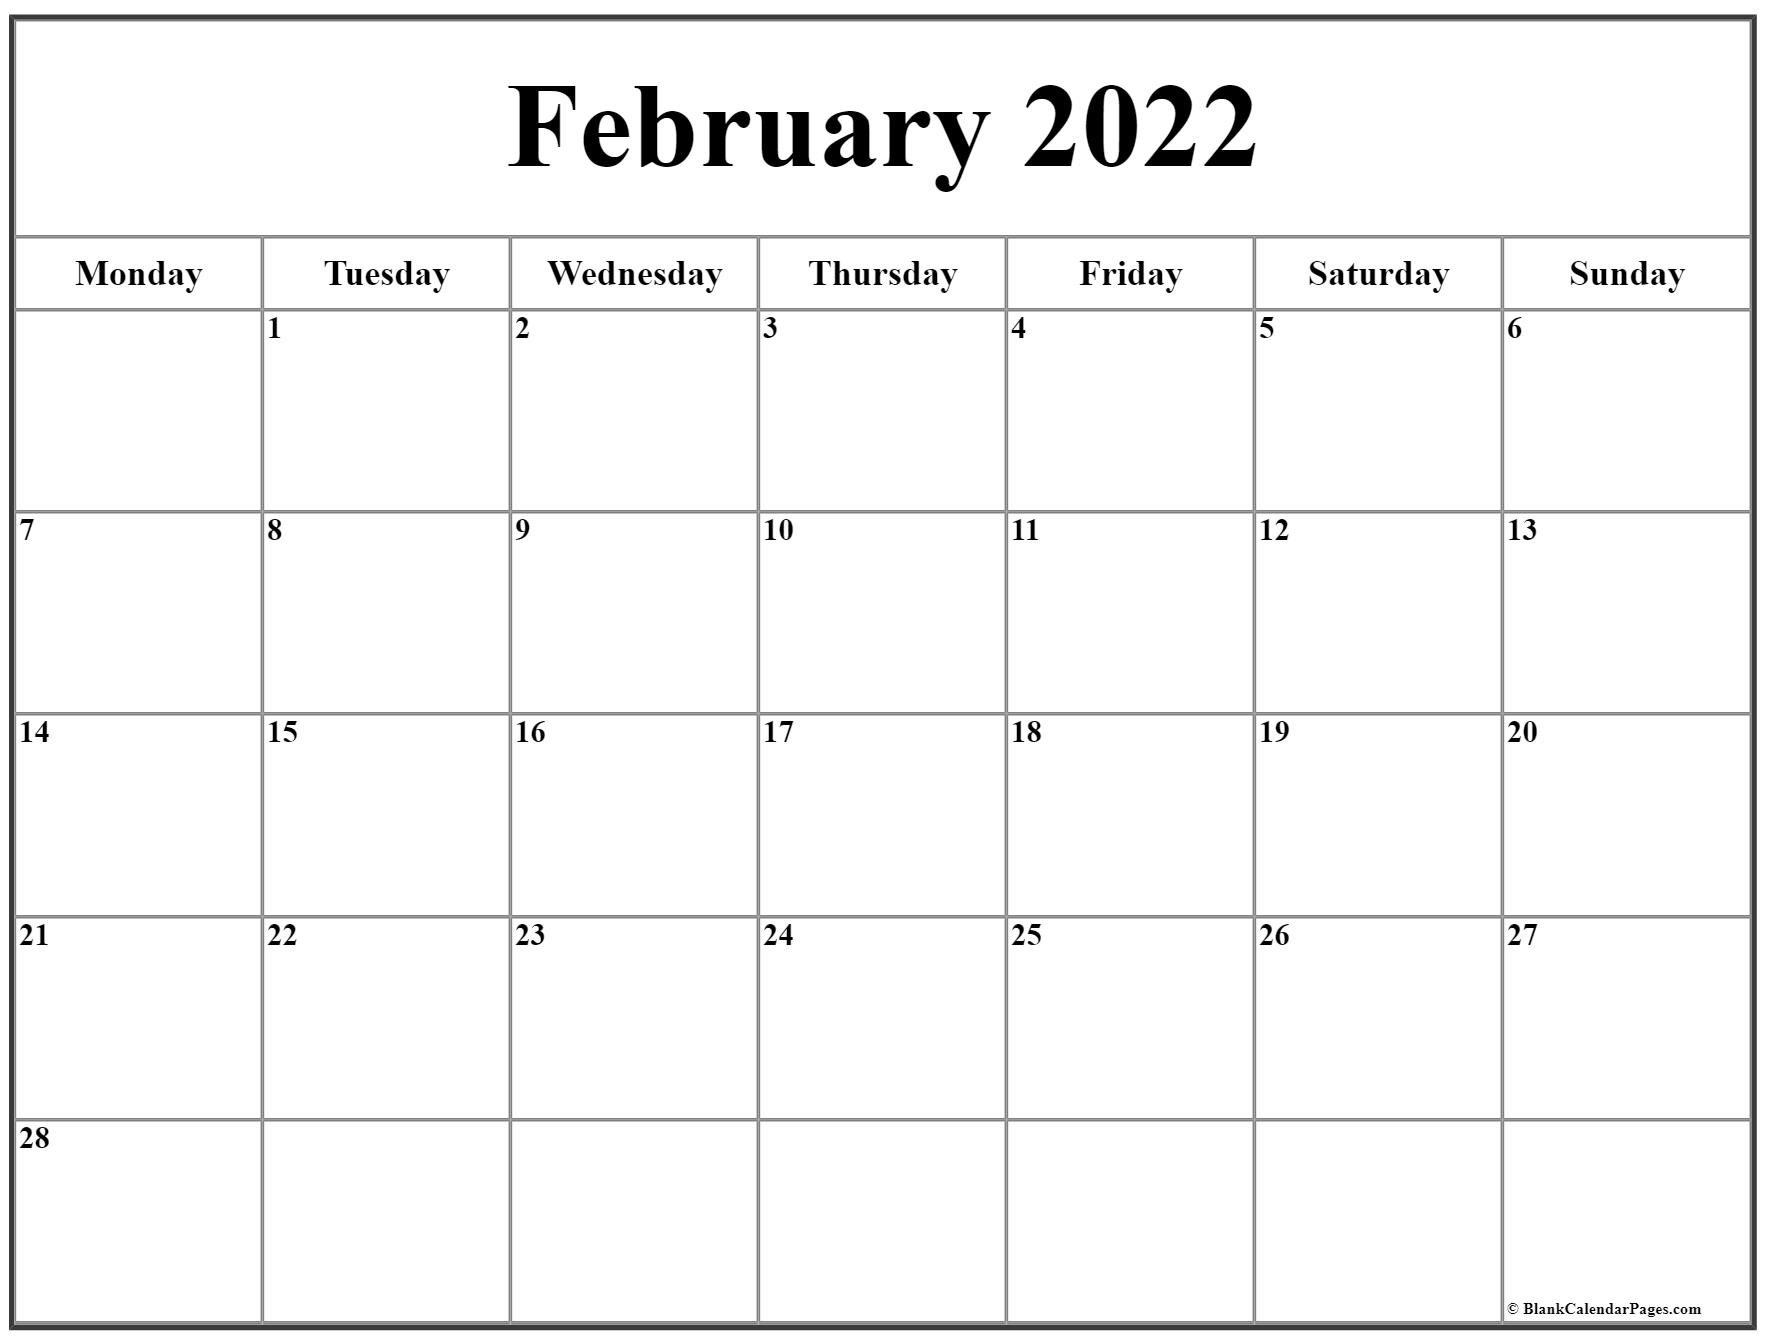 February 2022 Monday Calendar | Monday To Sunday intended for Printable May Calendar From Monday To Sunday